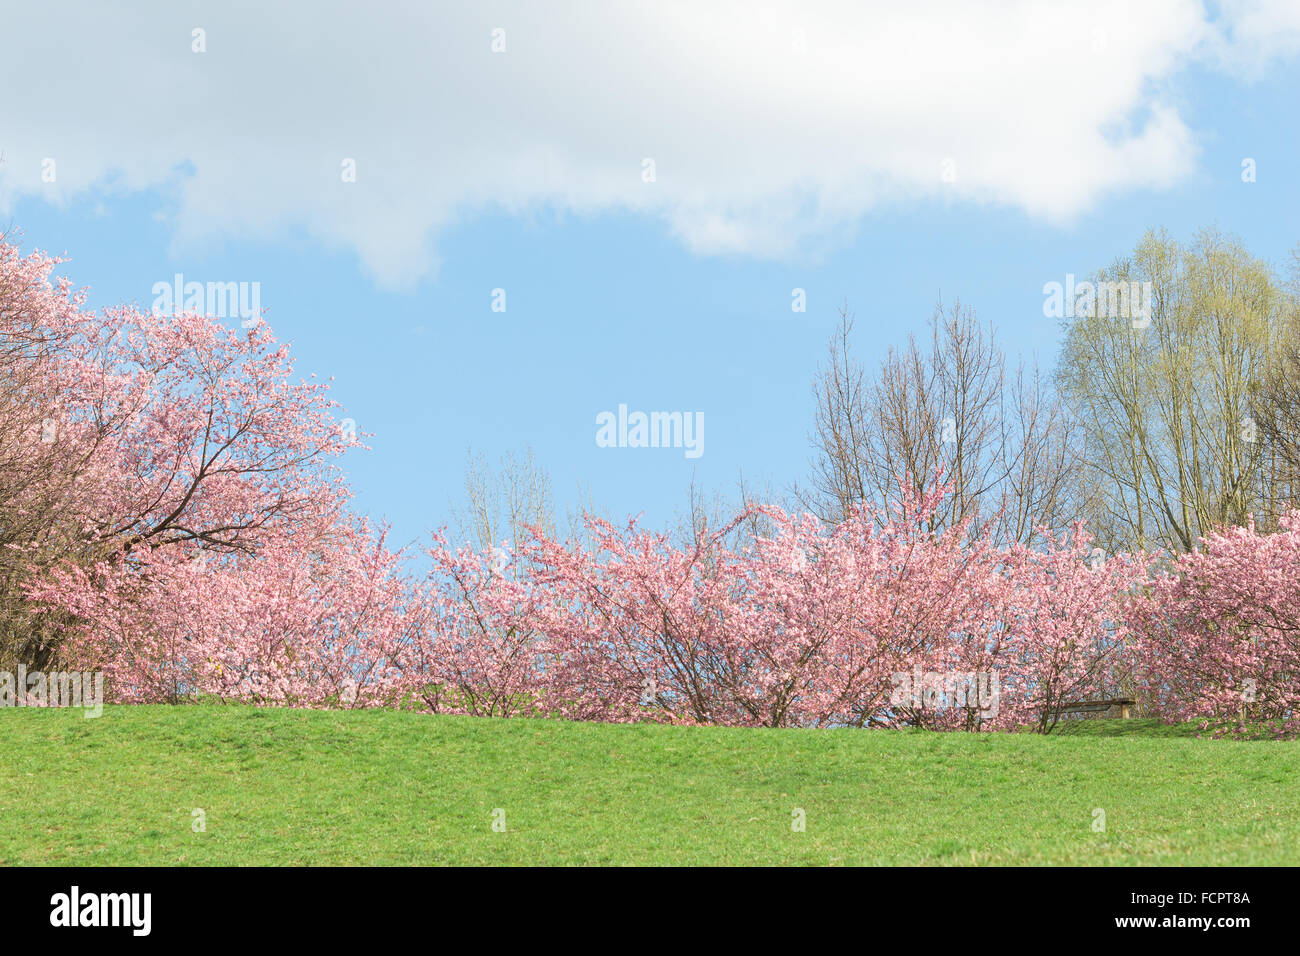 Springtime pink flowering apple trees in blooming nature sunshine landscape with green meadow Stock Photo